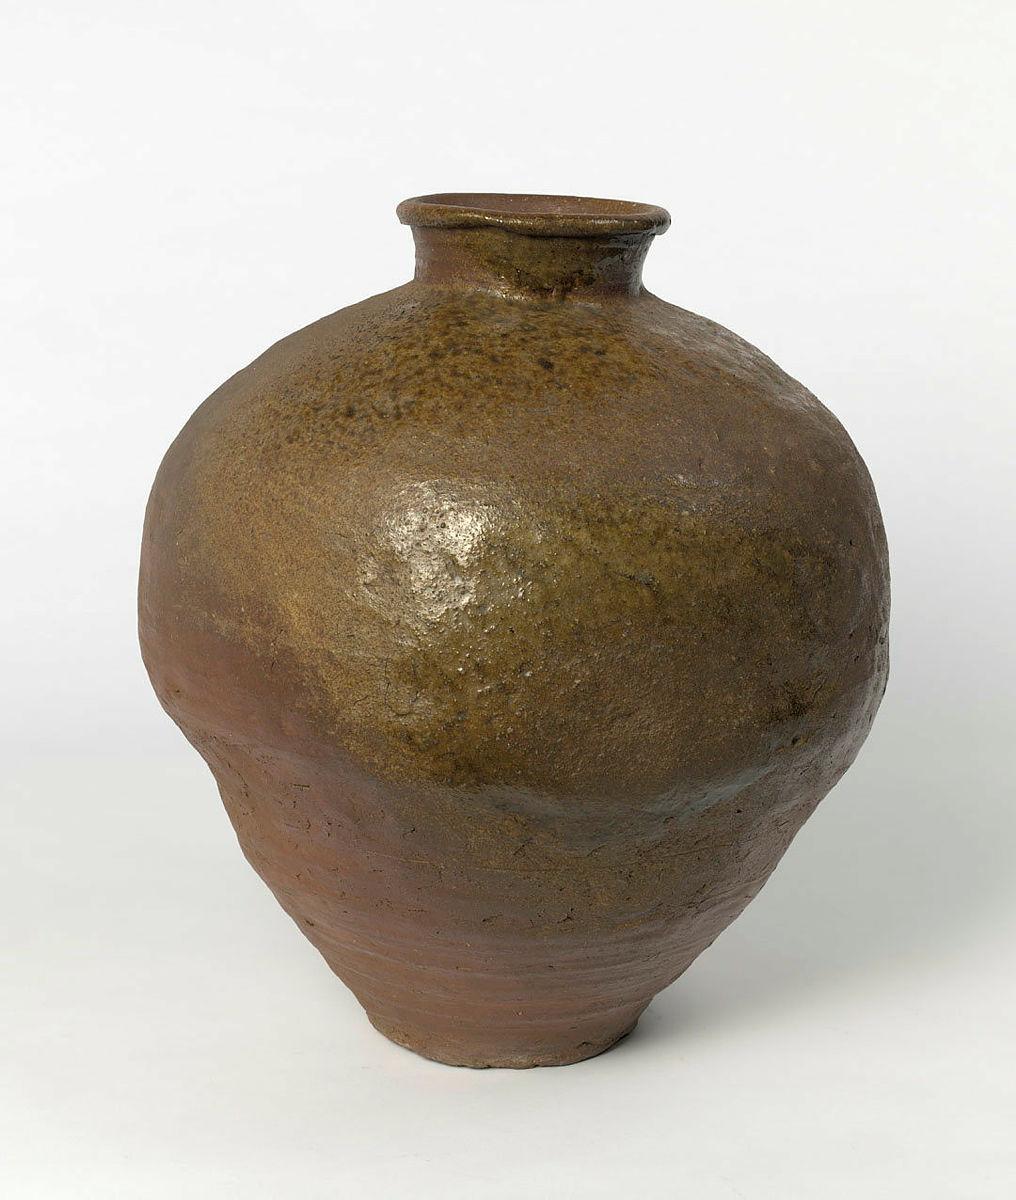 Artwork Narrow-necked jar (tsubo) this artwork made of Stoneware, dark brown clay hand built in three sections with ash deposit, created in 1400-01-01